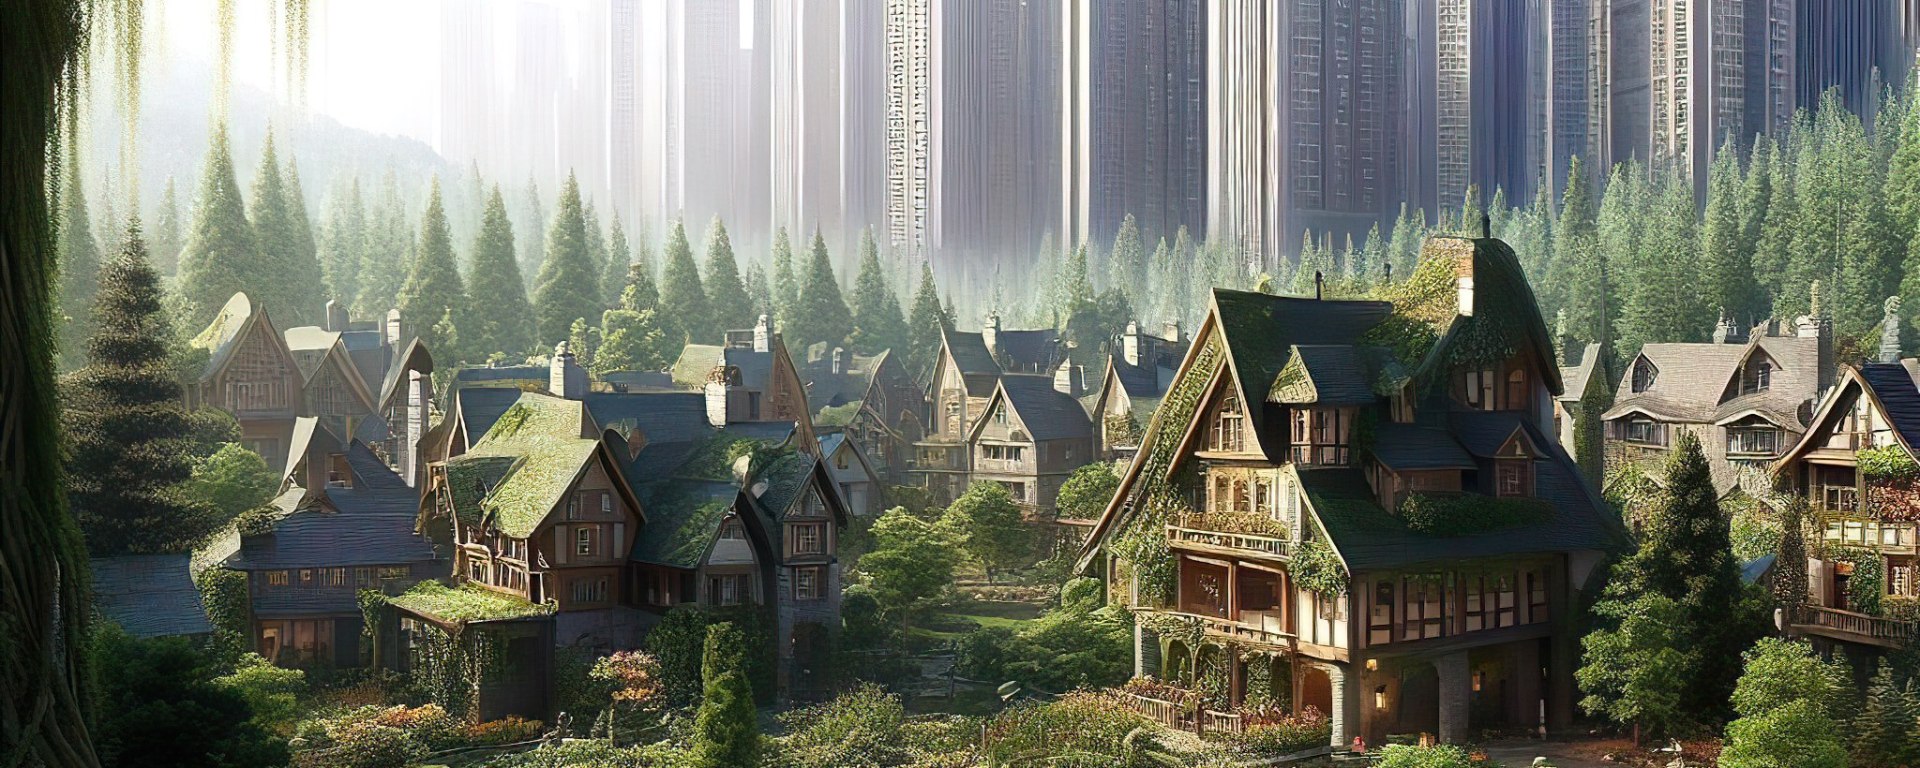 Village of Greenhaven, surrounded by Calvert City, embraced by an ancient forest